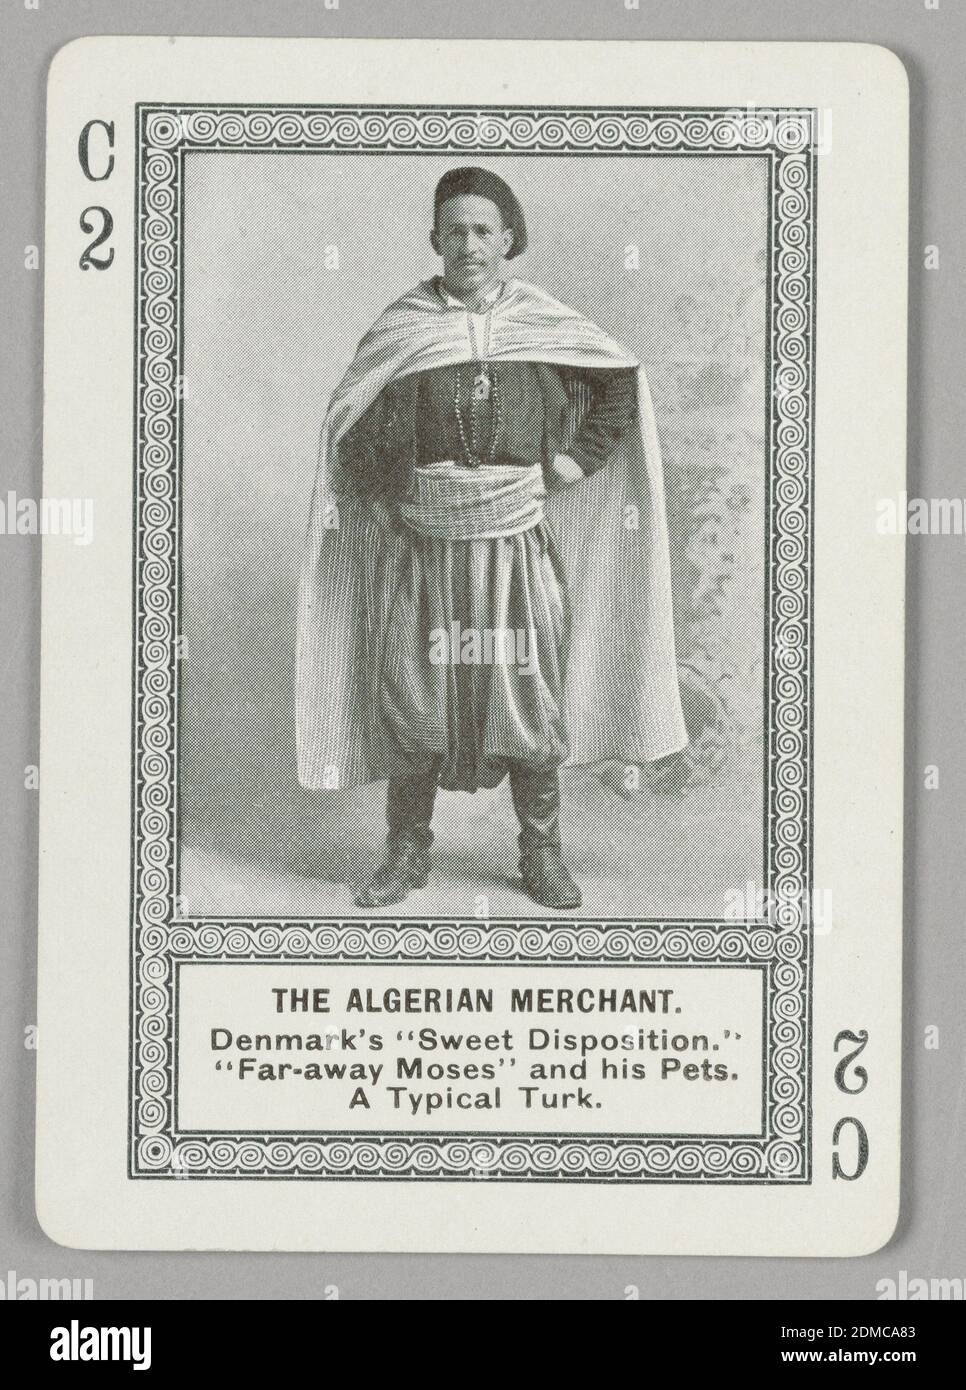 The Algerian Merchant, Game of Strange People, The Cincinnati Game Company, Cincinnati, Ohio, USA, Lithograph on paper, Rectangular format playing card with rounded edges, printed in black and white only. Part of a series of cards from an educational game featuring half-tone reproductions of people in national costumes from different countries around the world. Within rectangular swirling border, a photoillustration of a male figure in exotic non-Western costume, wearing boots, a hat, and a long cape. Below the image, printed in black ink: THE ALGERIAN MERCHANT. / Denmark's 'Sweet Disposition Stock Photo